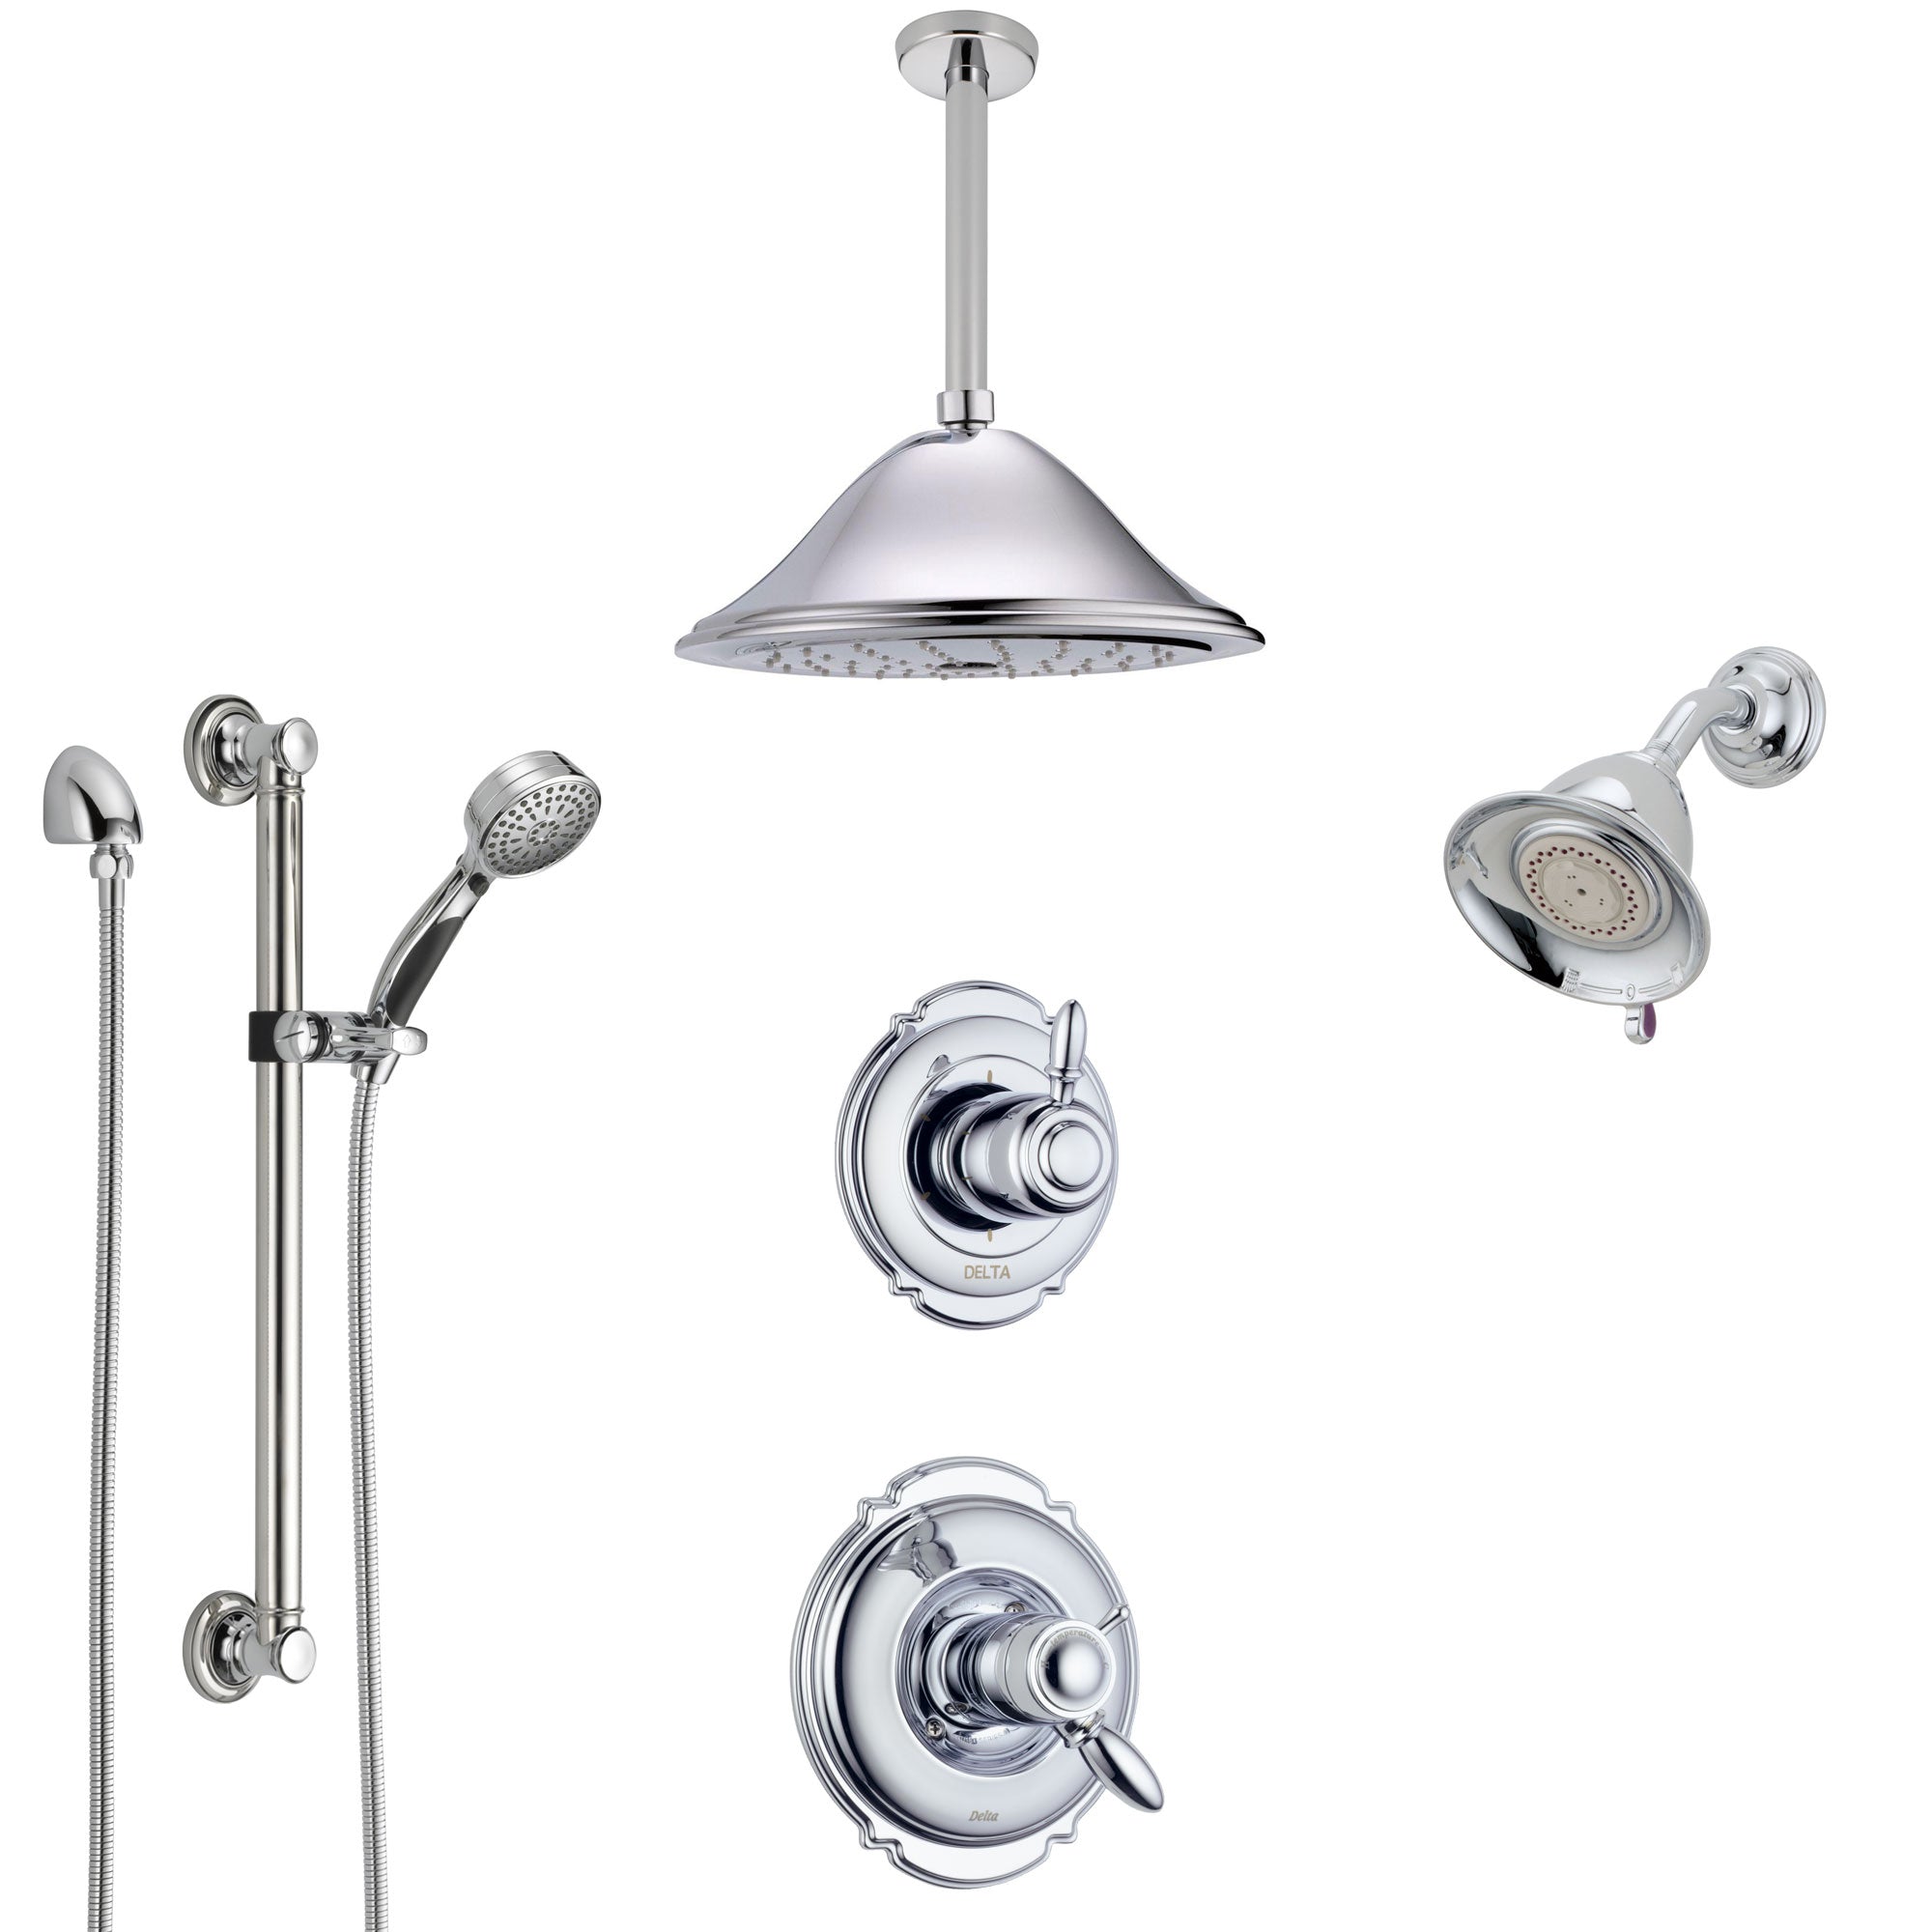 Delta Victorian Chrome Shower System with Dual Thermostatic Control, Diverter, Showerhead, Ceiling Showerhead, and Grab Bar Hand Shower SS17T25525